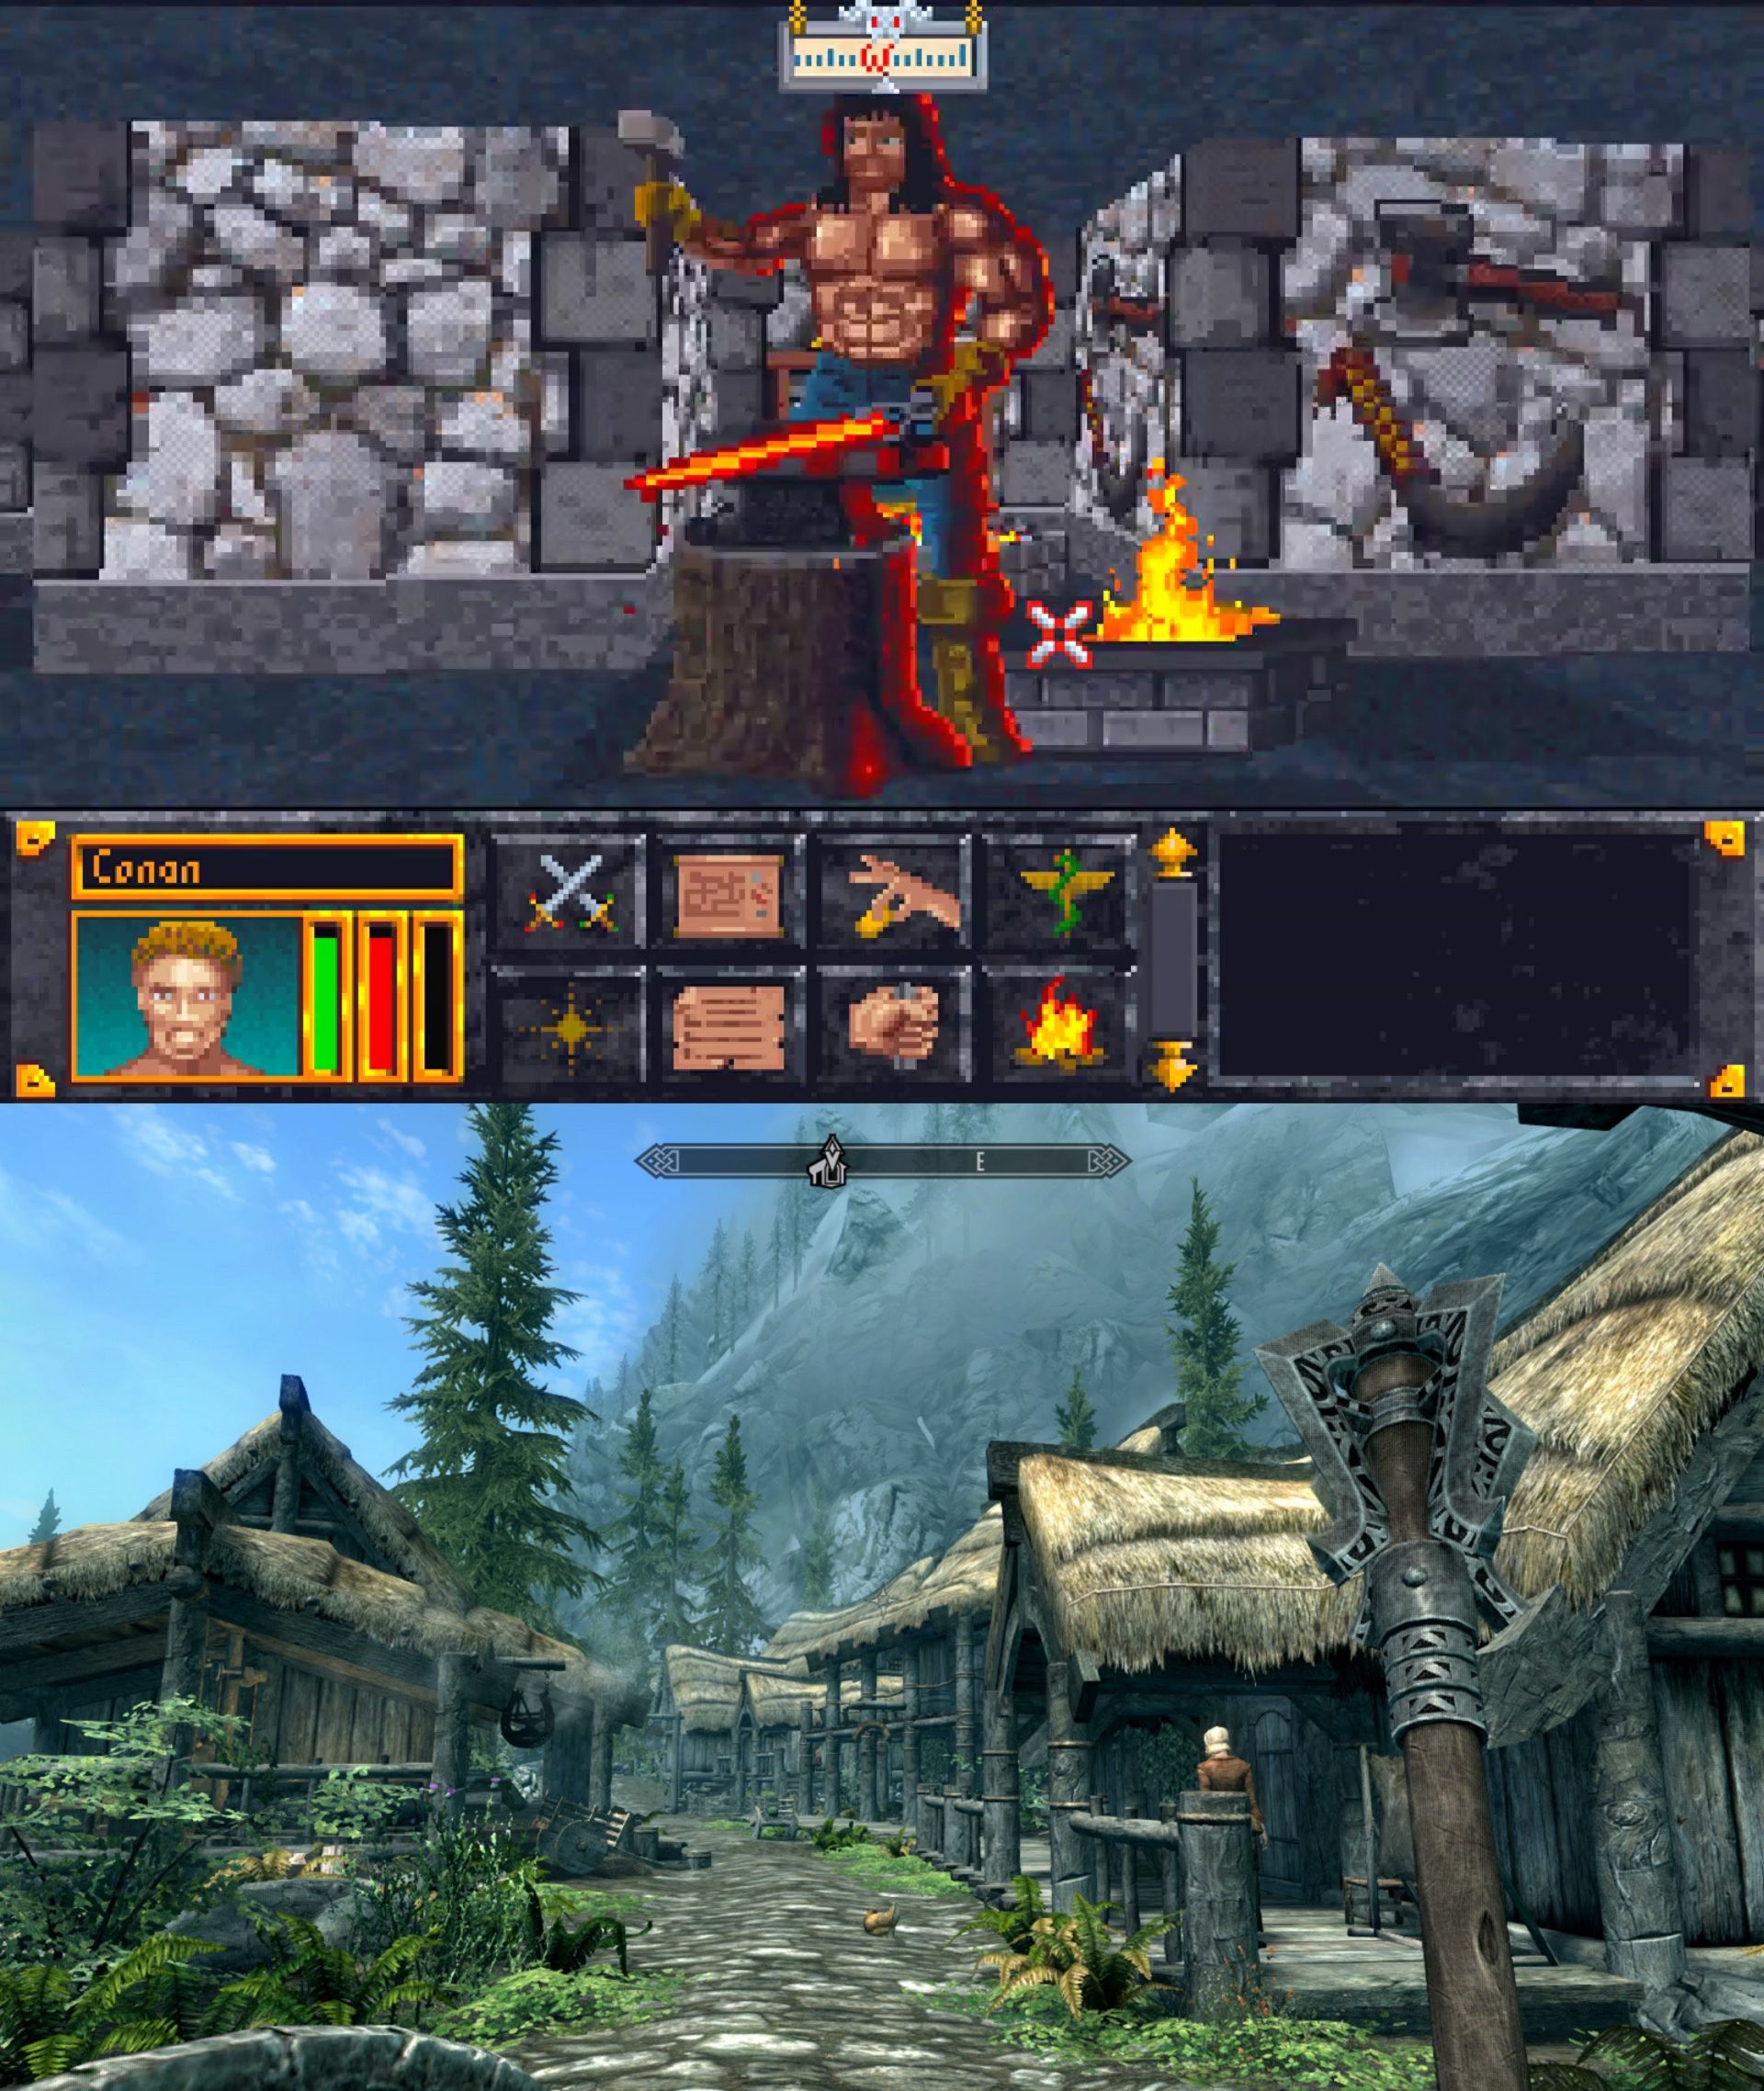 Then vs now Video games through the decades image 18